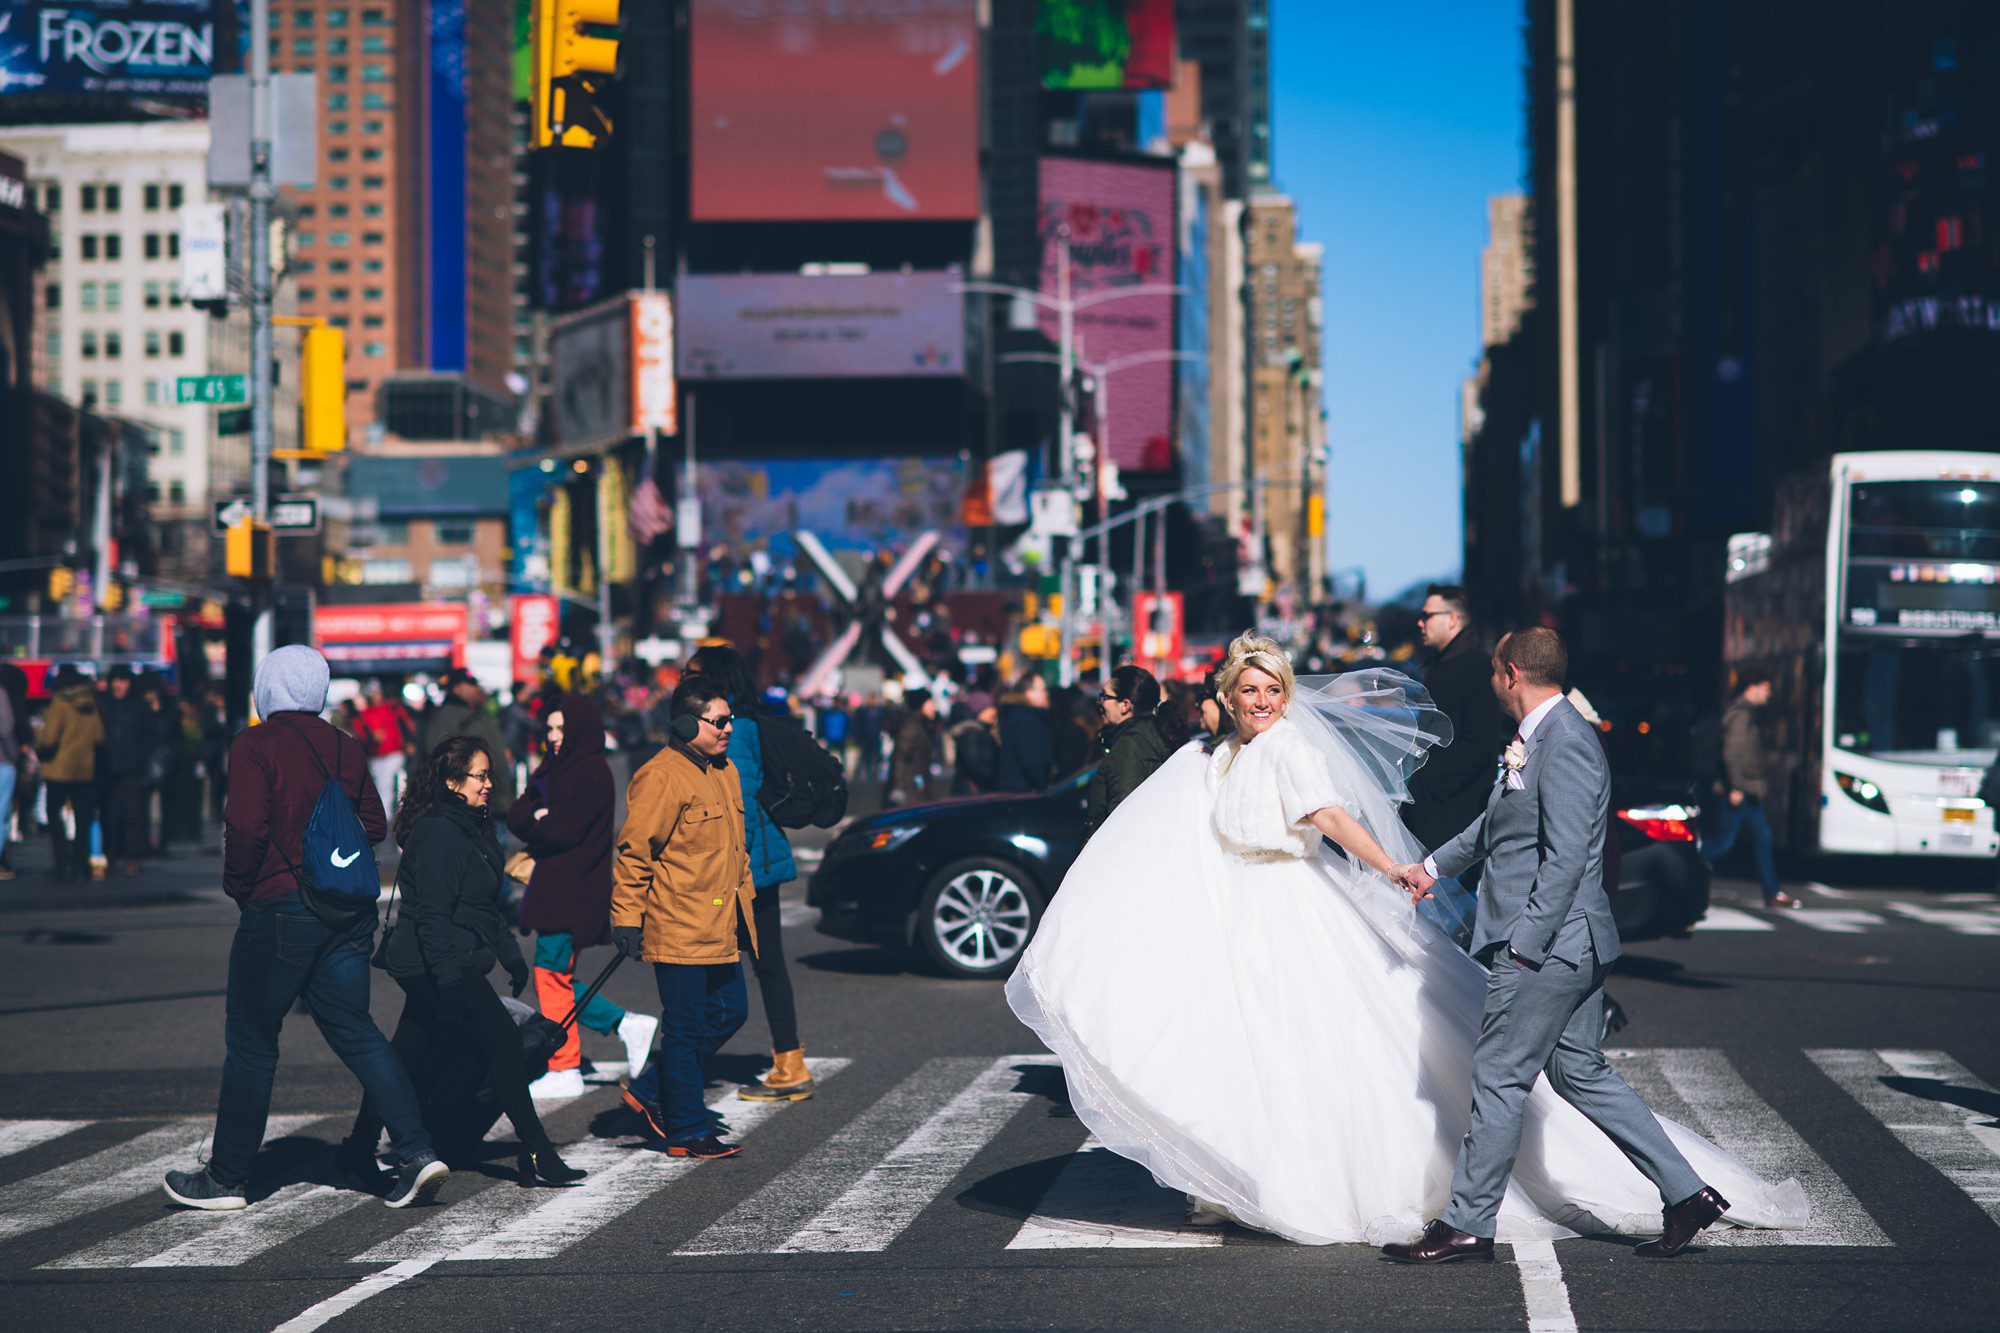 Most popular places for wedding photos in New York